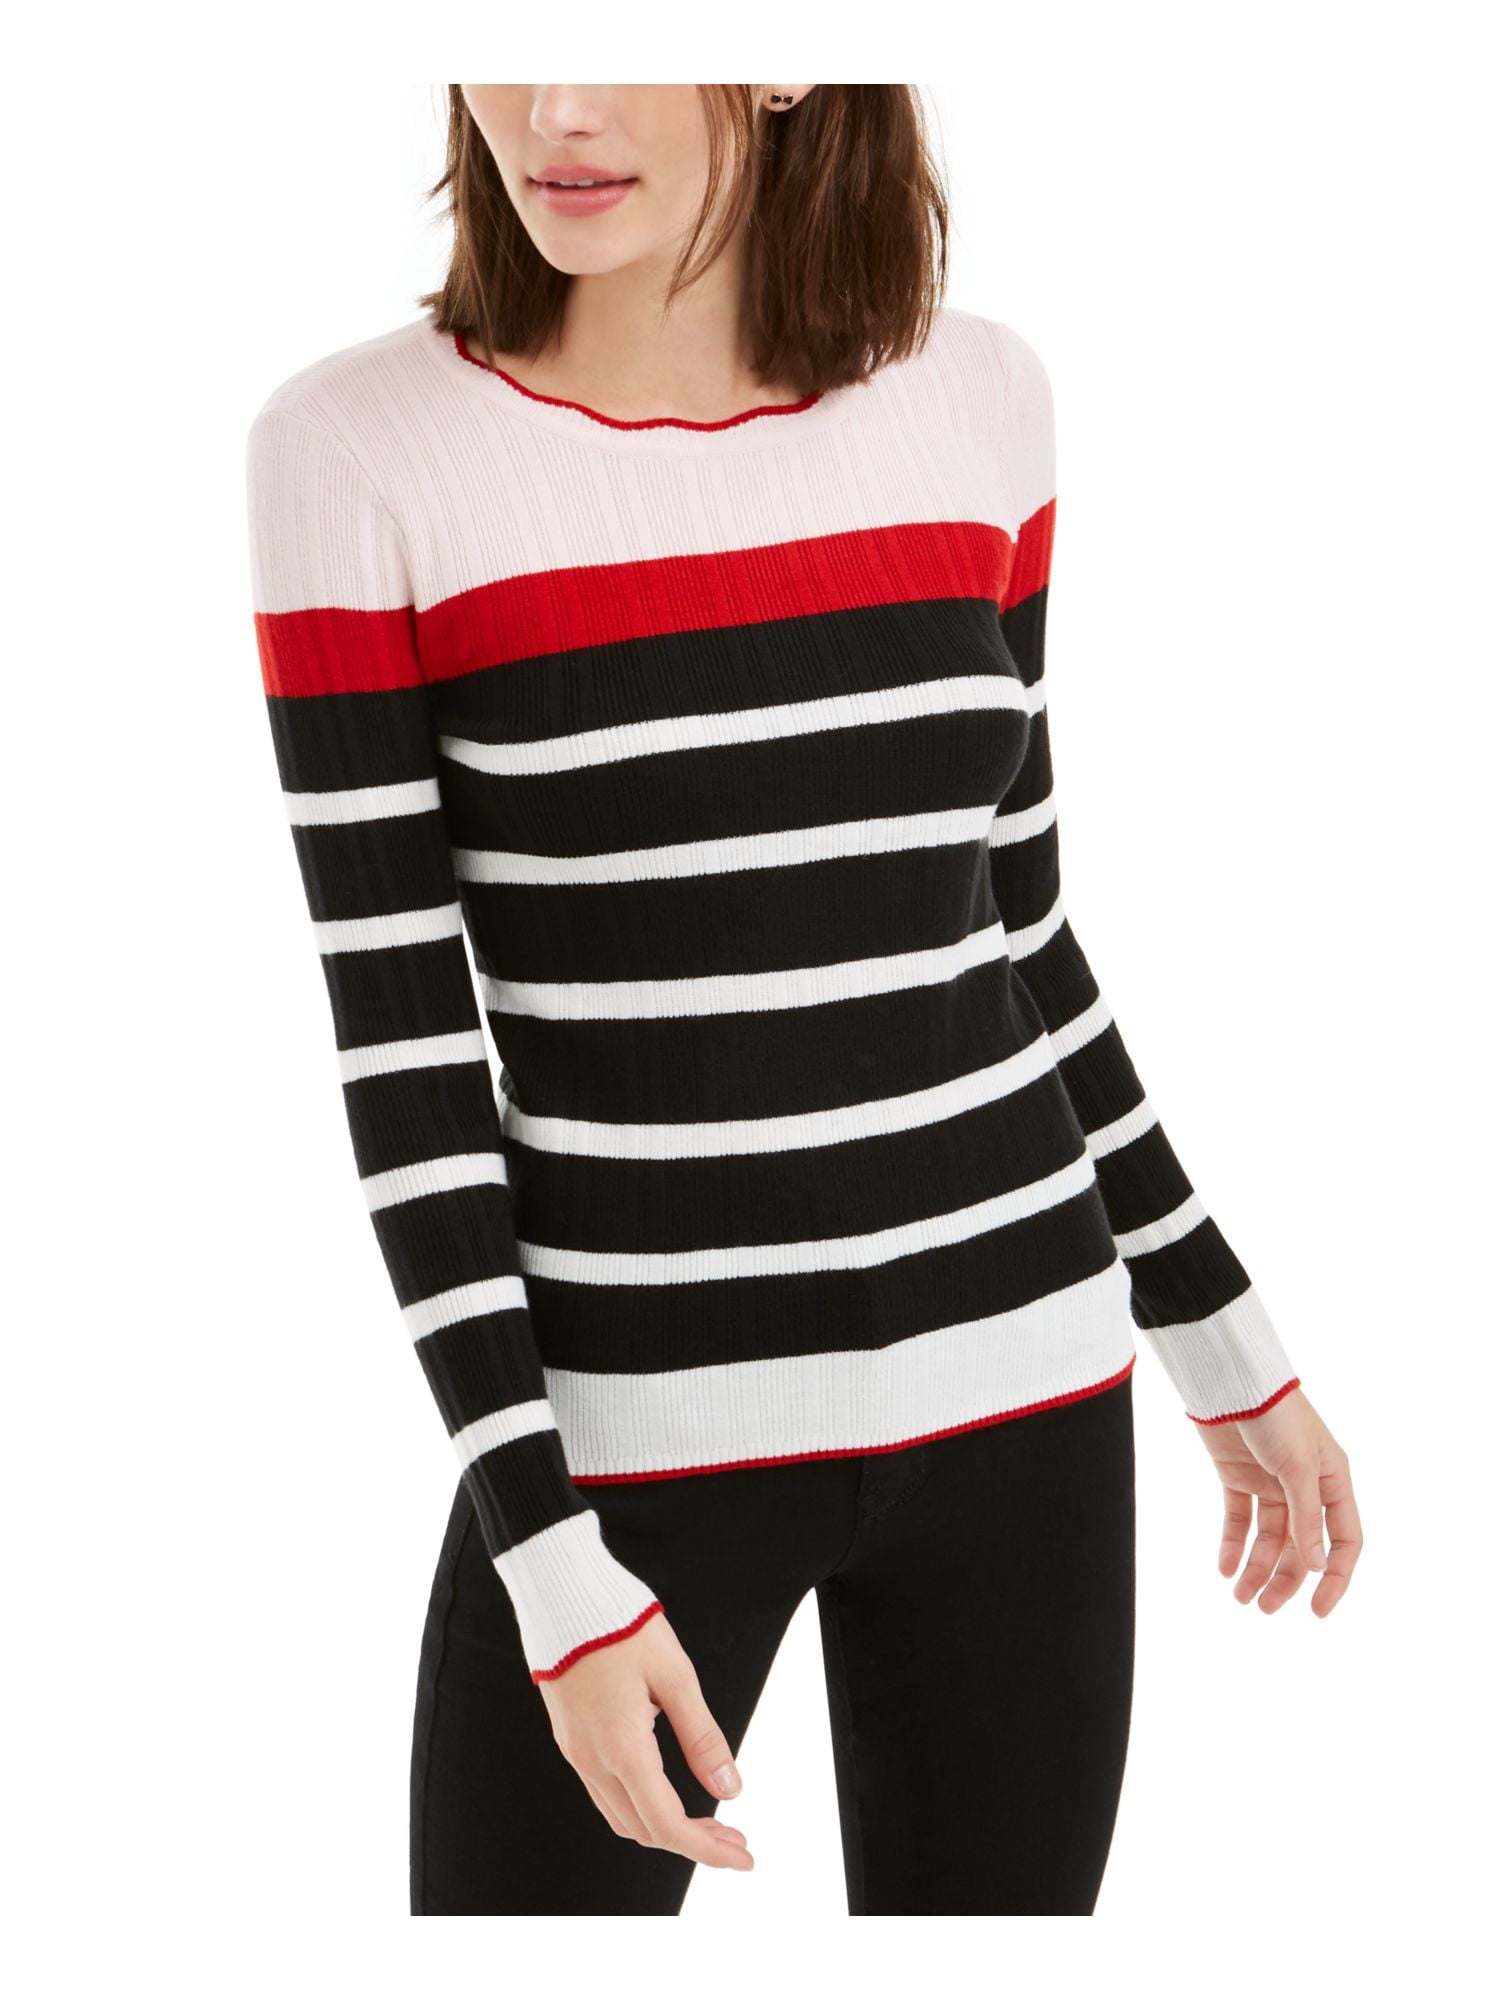 Maison Jules Striped Bell-Sleeve Sweater